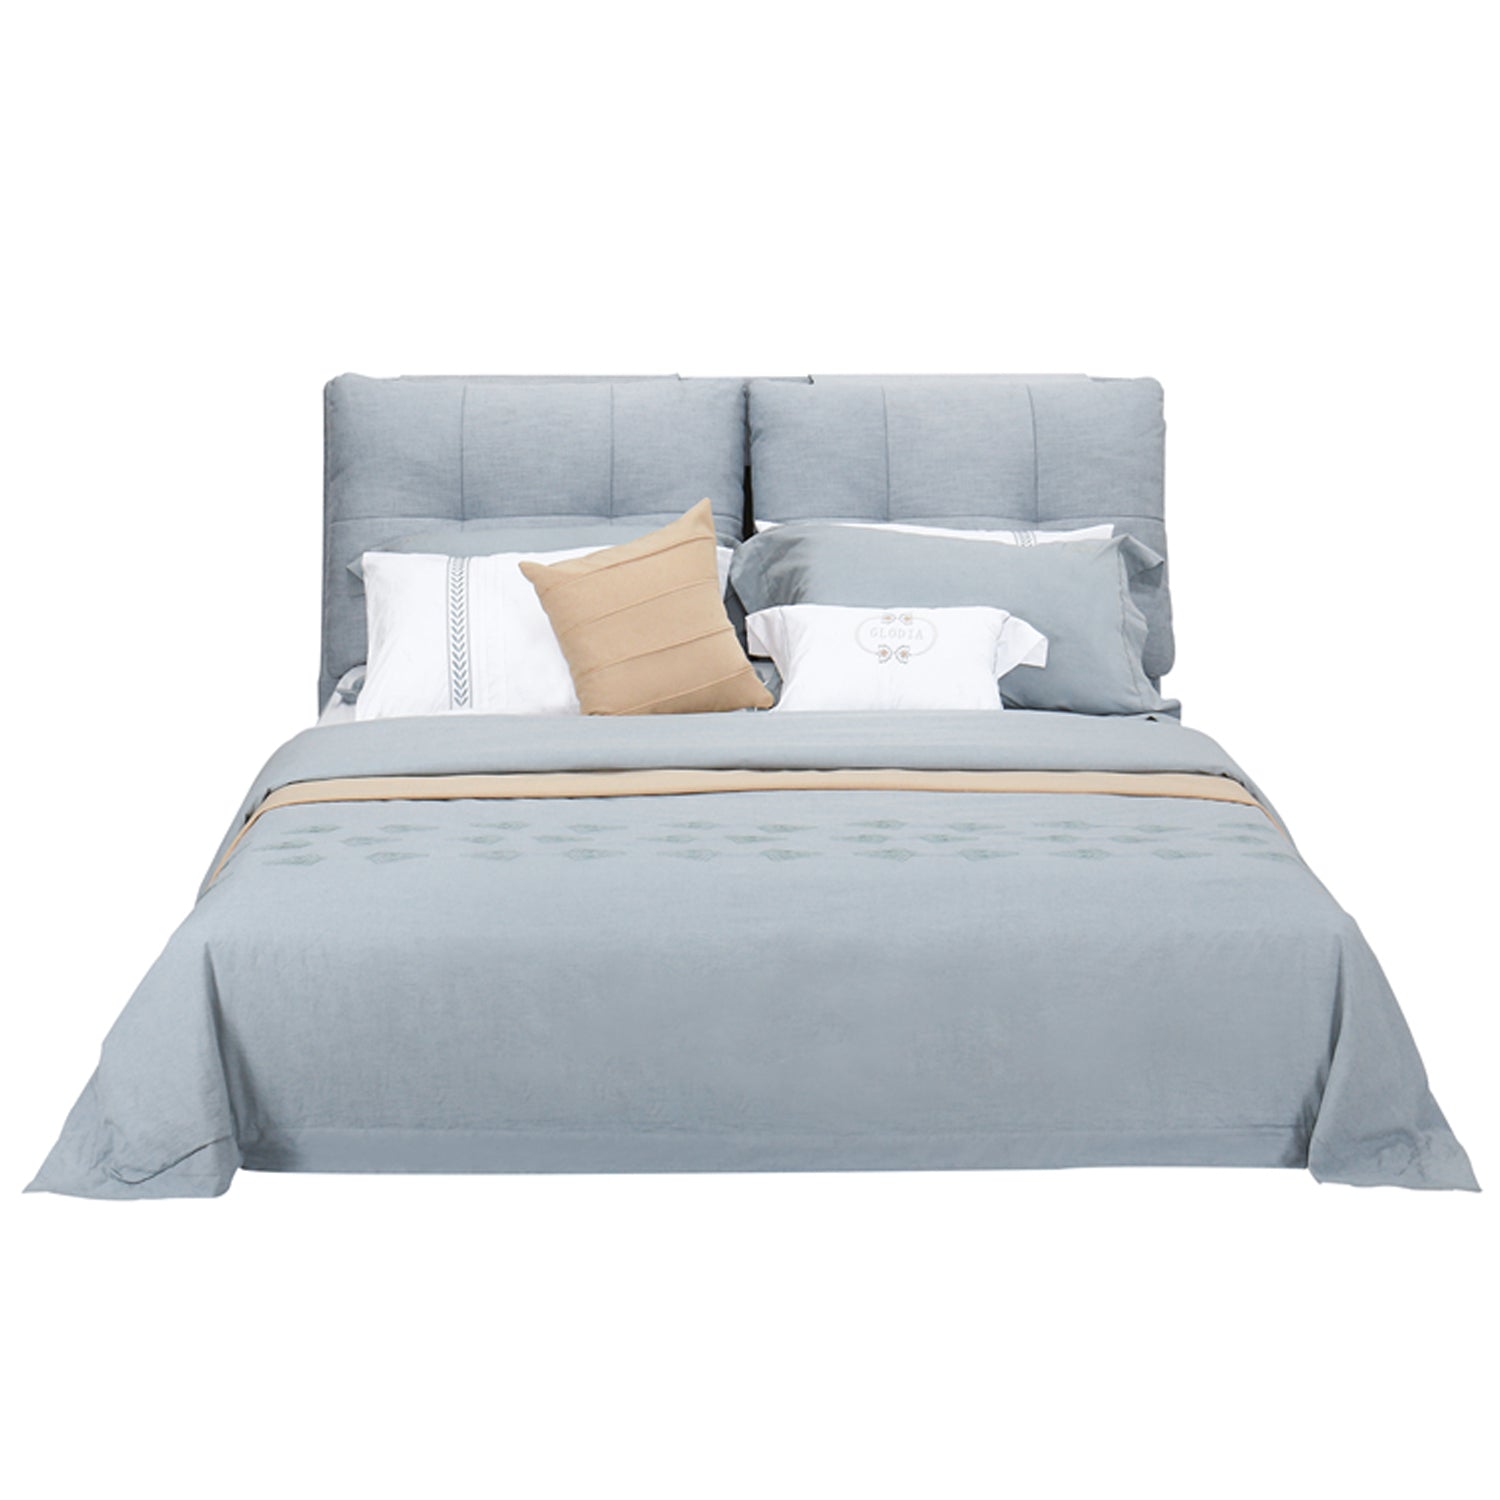 Blue-grey upholstered bed with grey bedding and decorative pillows in white, grey, and beige, showcasing a stylish and comfortable sleep setup.